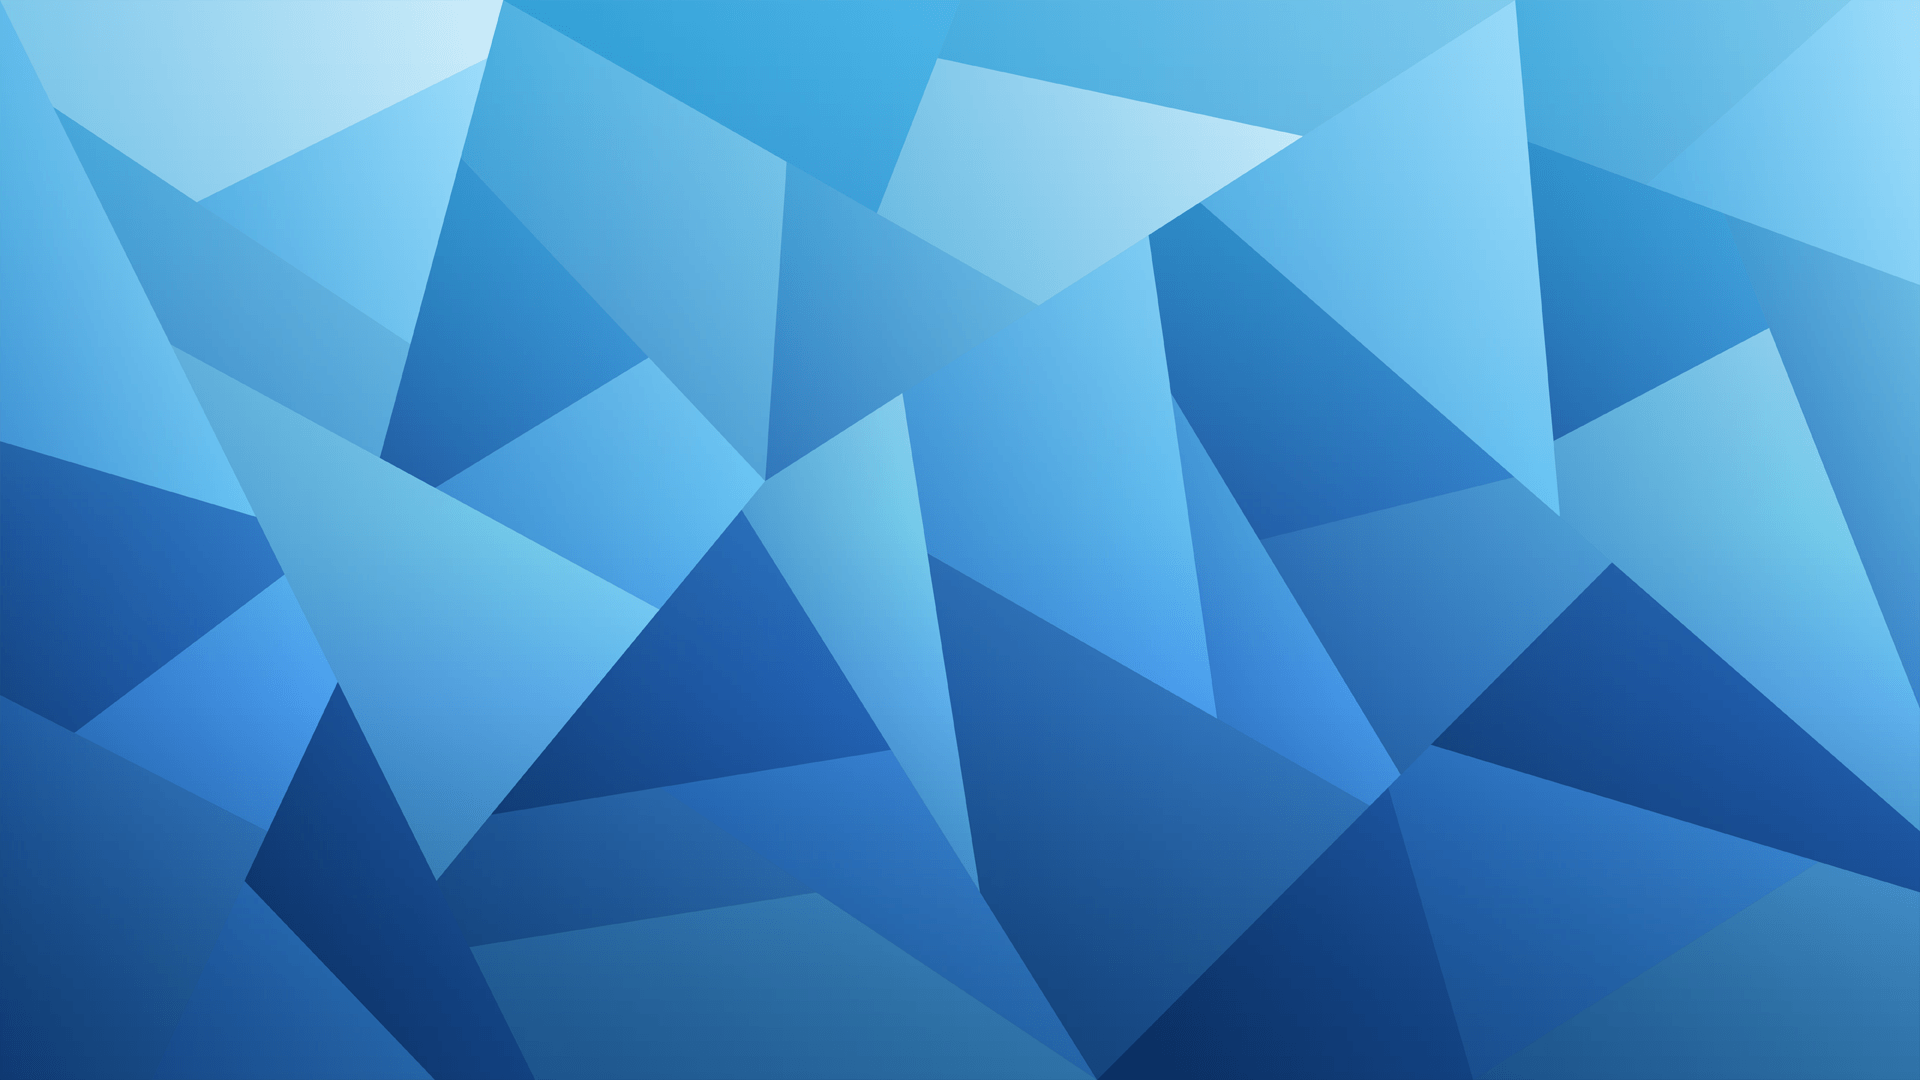 Blue Triangle Wallpaper 5071 1920 x 1080. Abstract wallpaper, Abstract, Wallpaper picture